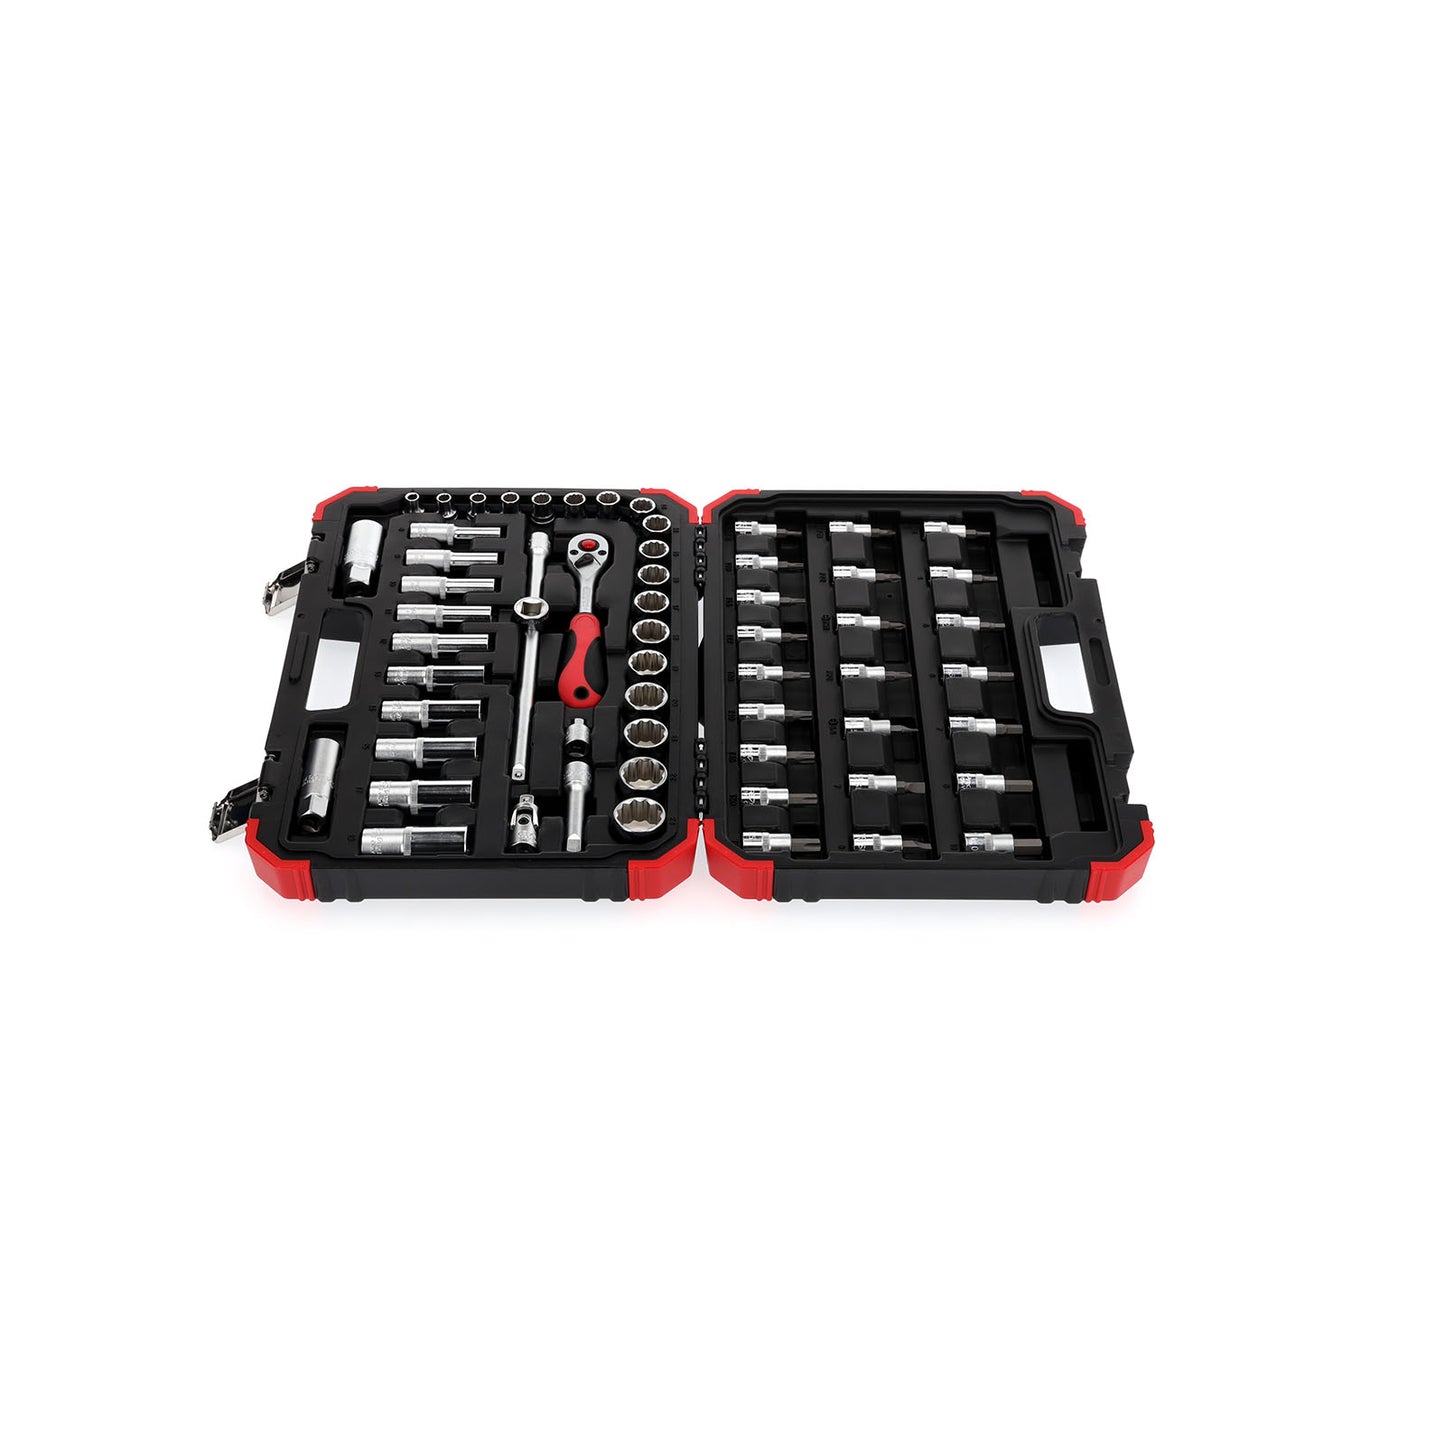 GEDORE red R59003059 - Socket wrench set 3/8" 6-24mm 59 pieces (3300054)